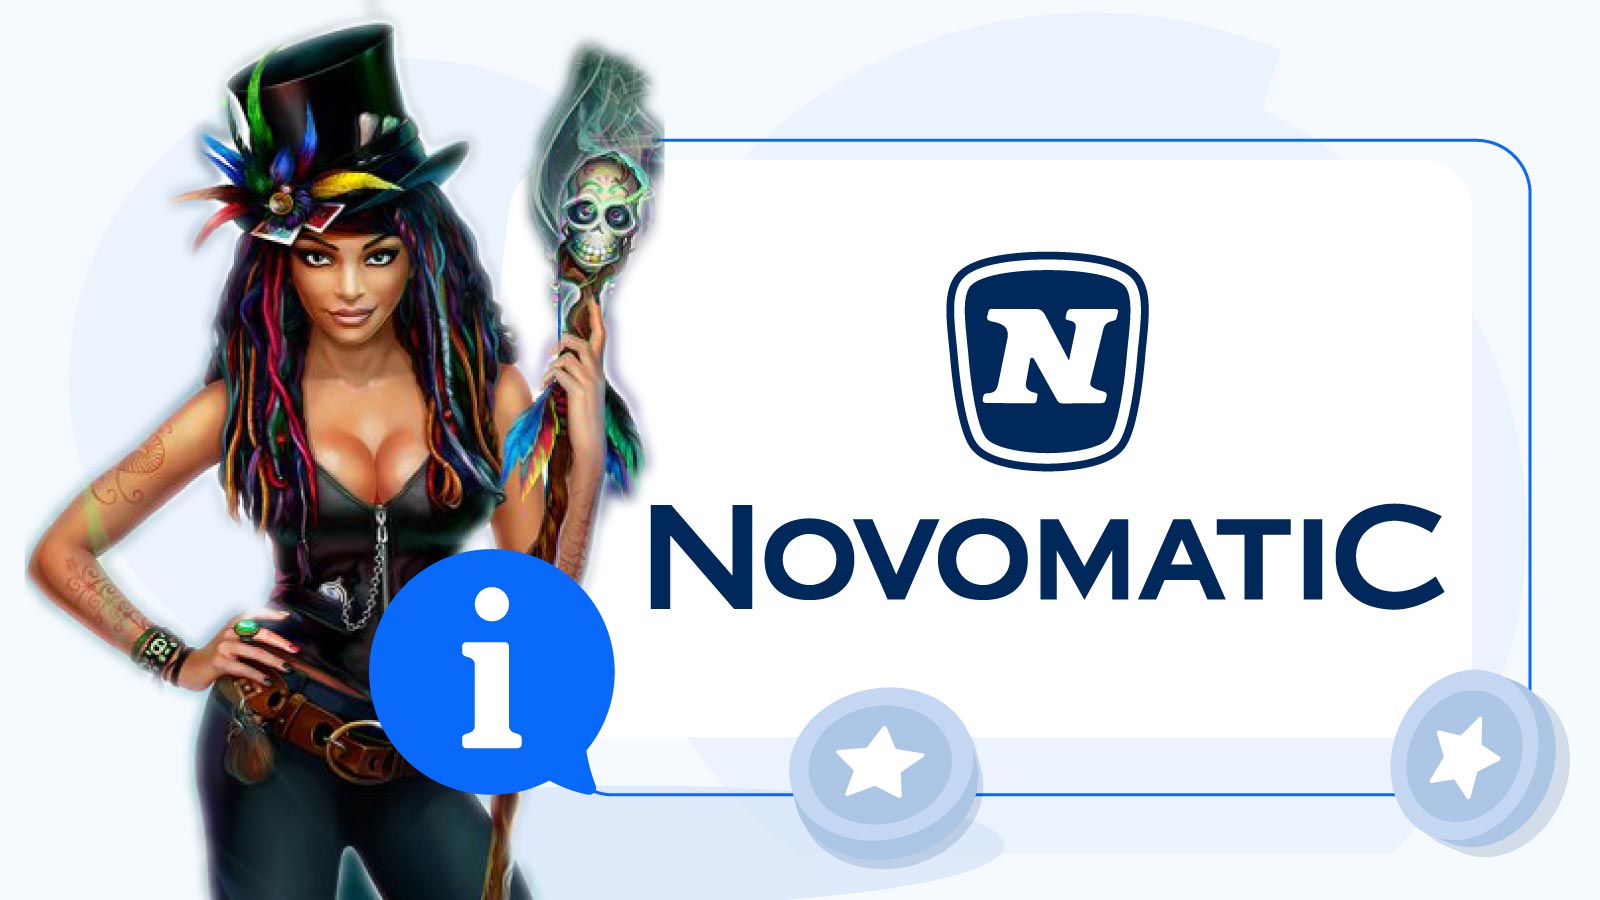 What is Novomatic